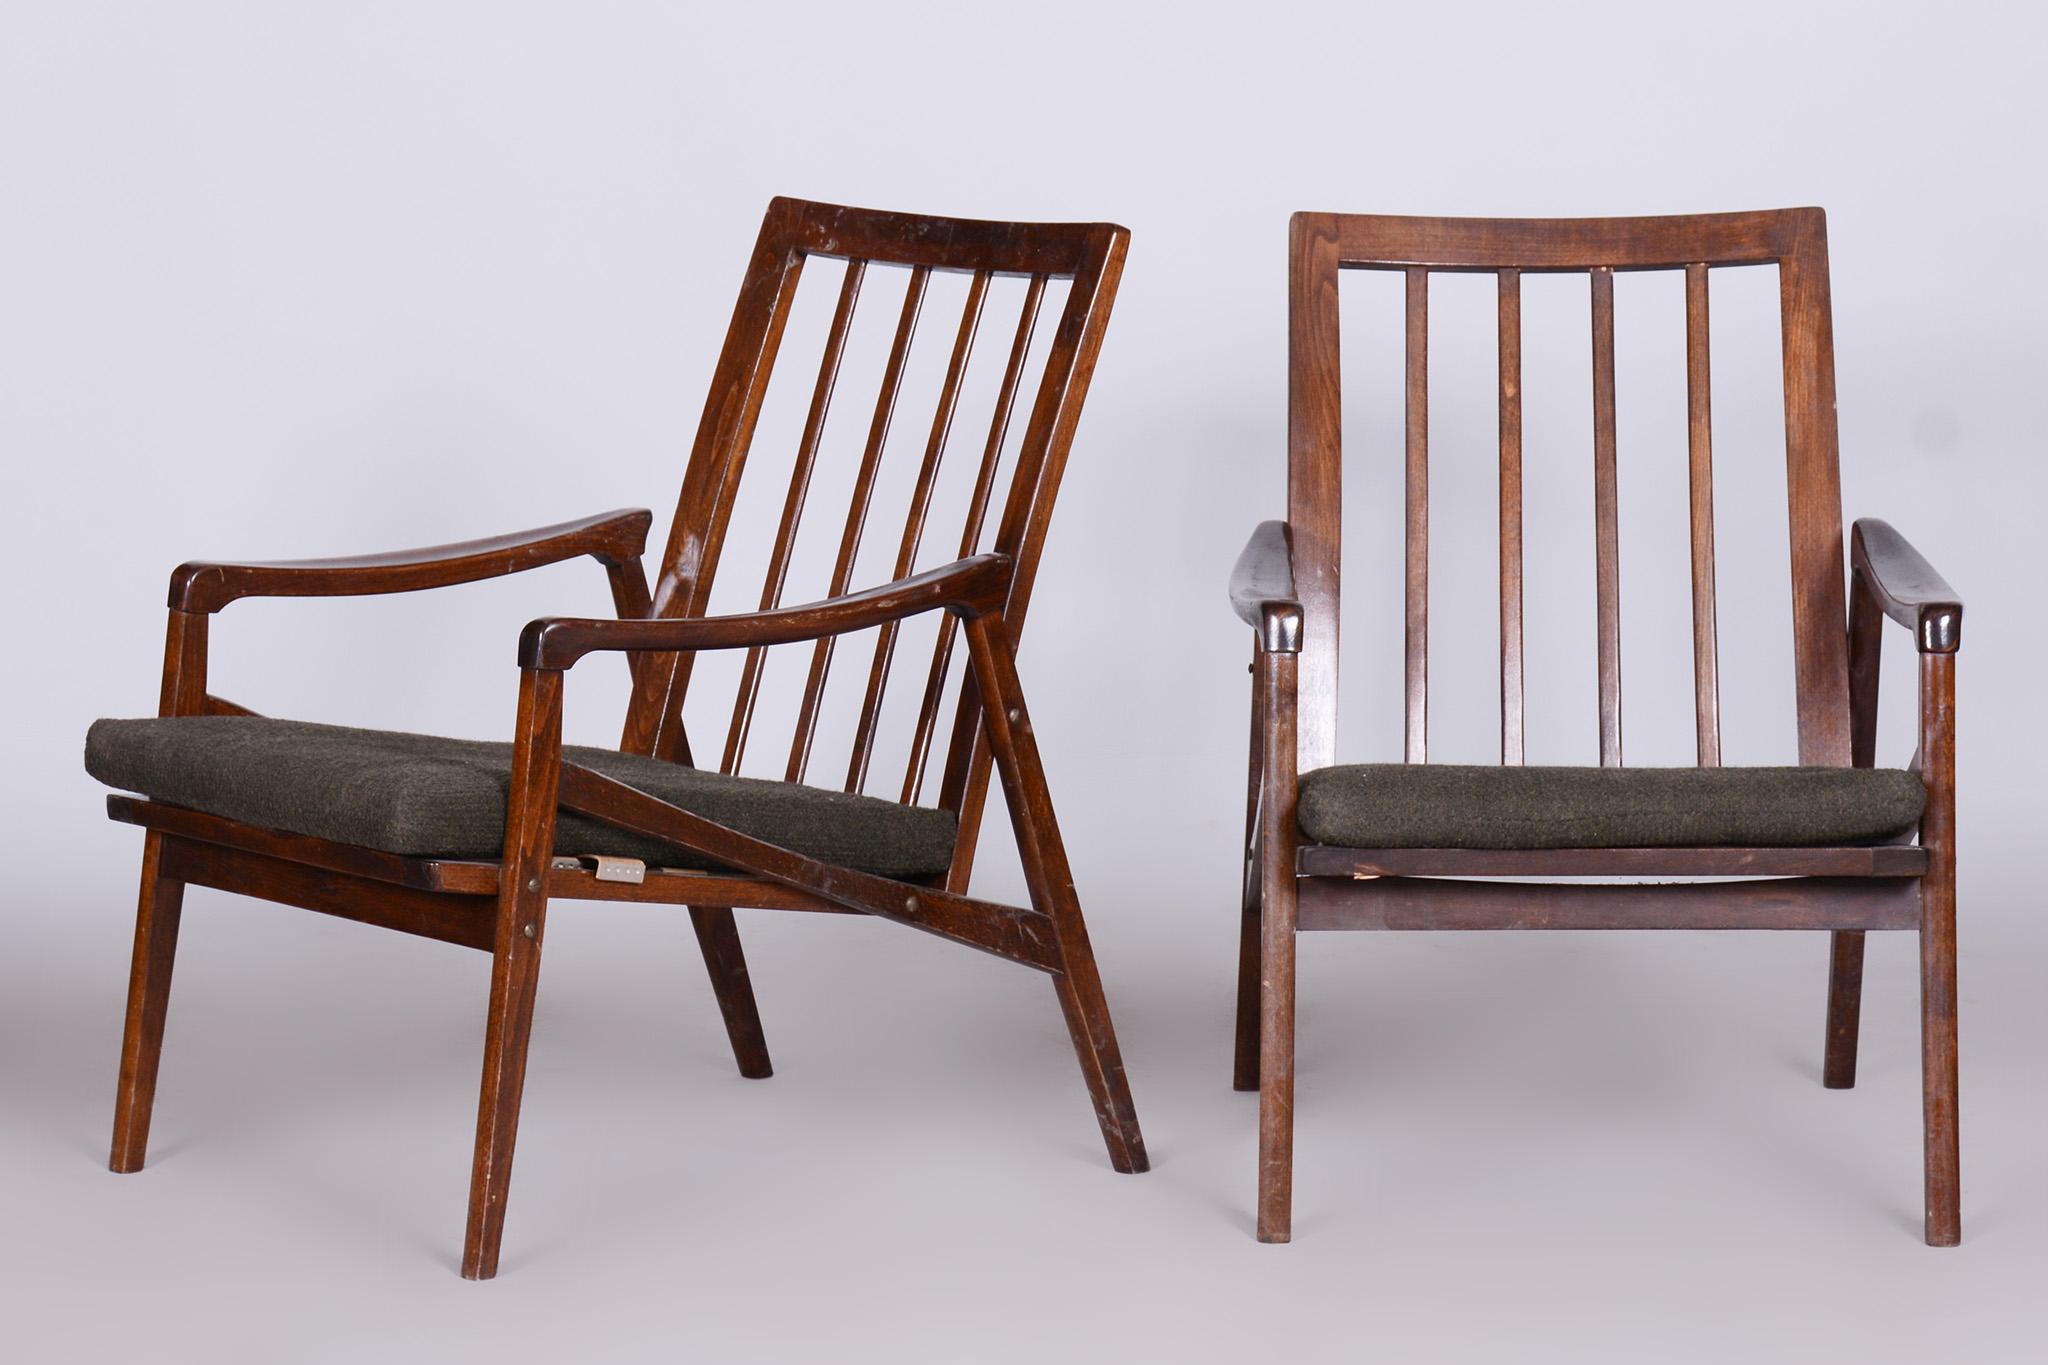 Pair of Mid-Century Armchairs, Stained Beech, Revived Polish, Czechia, 1960s For Sale 2